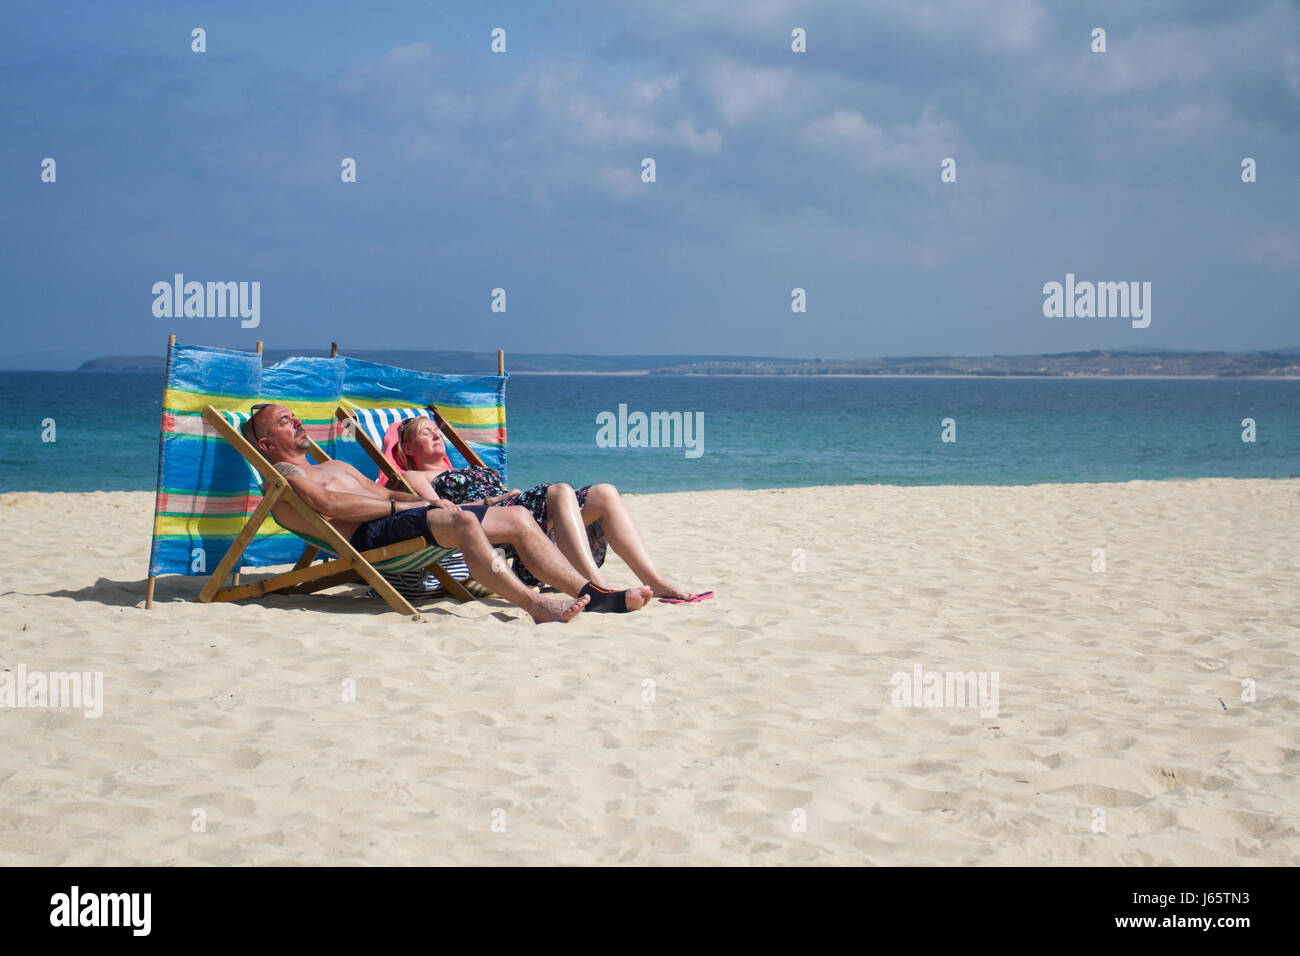 Two British holidaymakers sunbathing in striped deckchairs with a colourful wind break on the sandy beach at Porthminster, Cornwall, UK. Stock Photo